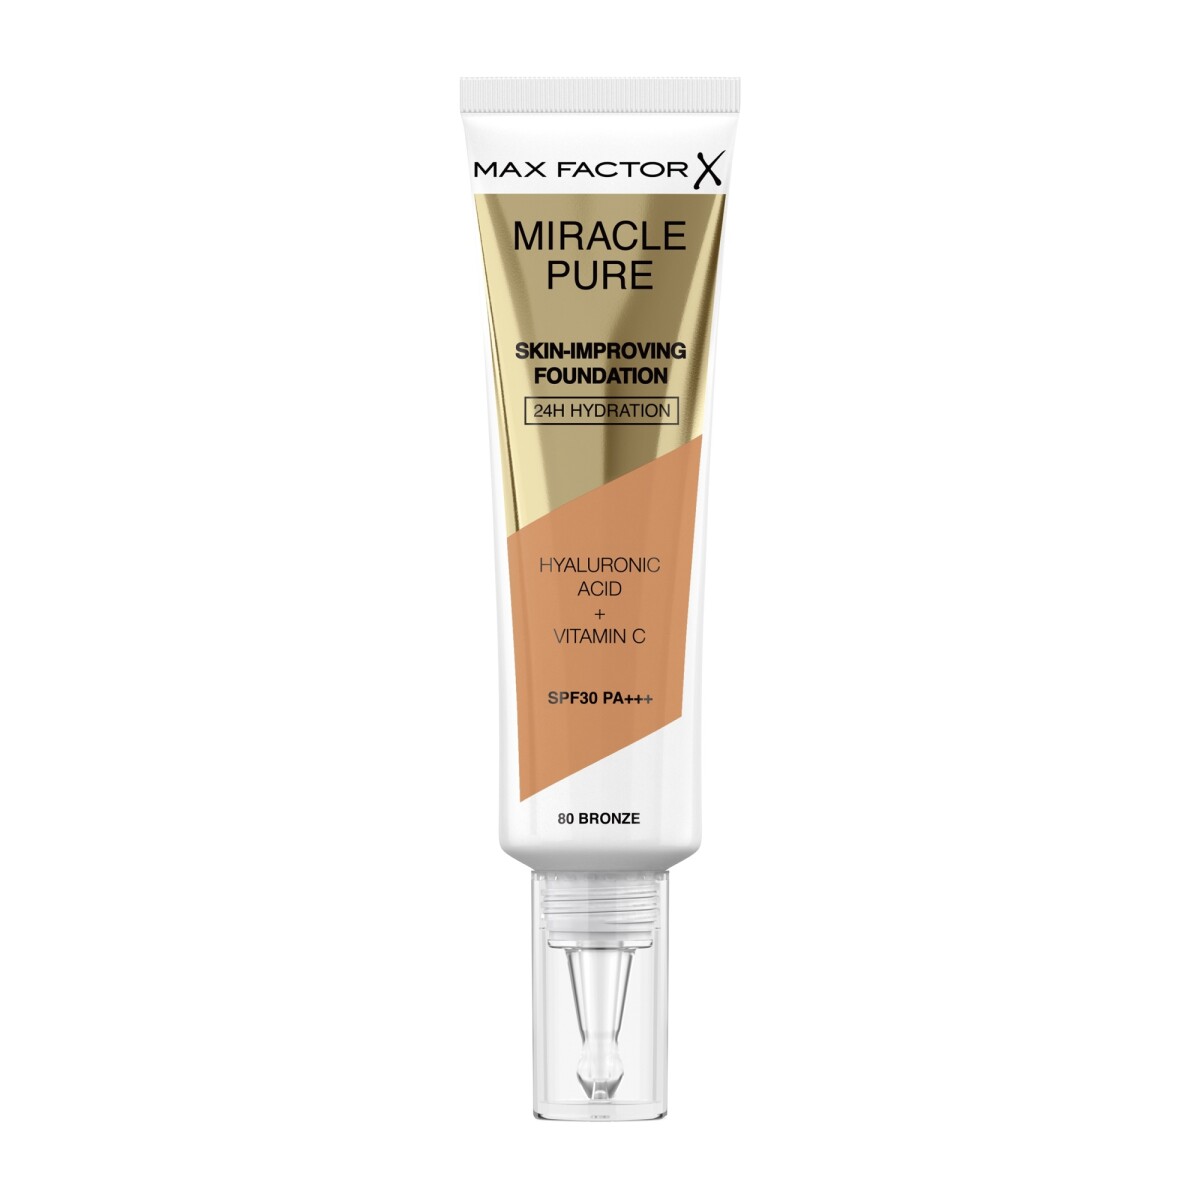 Max Factor Miracle Pure Foundation Bronze #80 